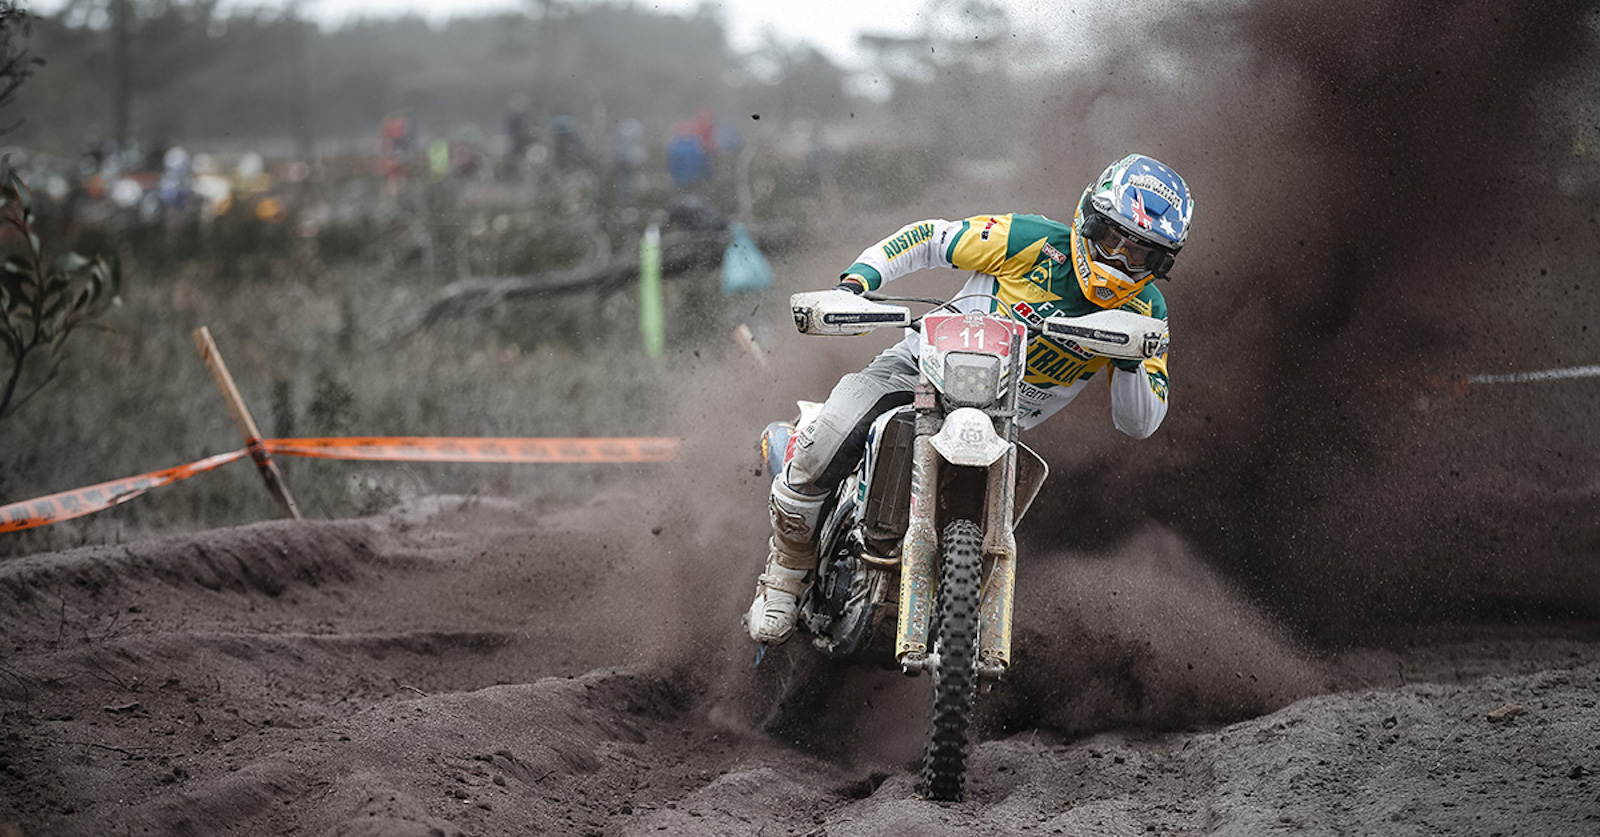 Results feed: ISDE 2019 Day 1 – Australia take charge